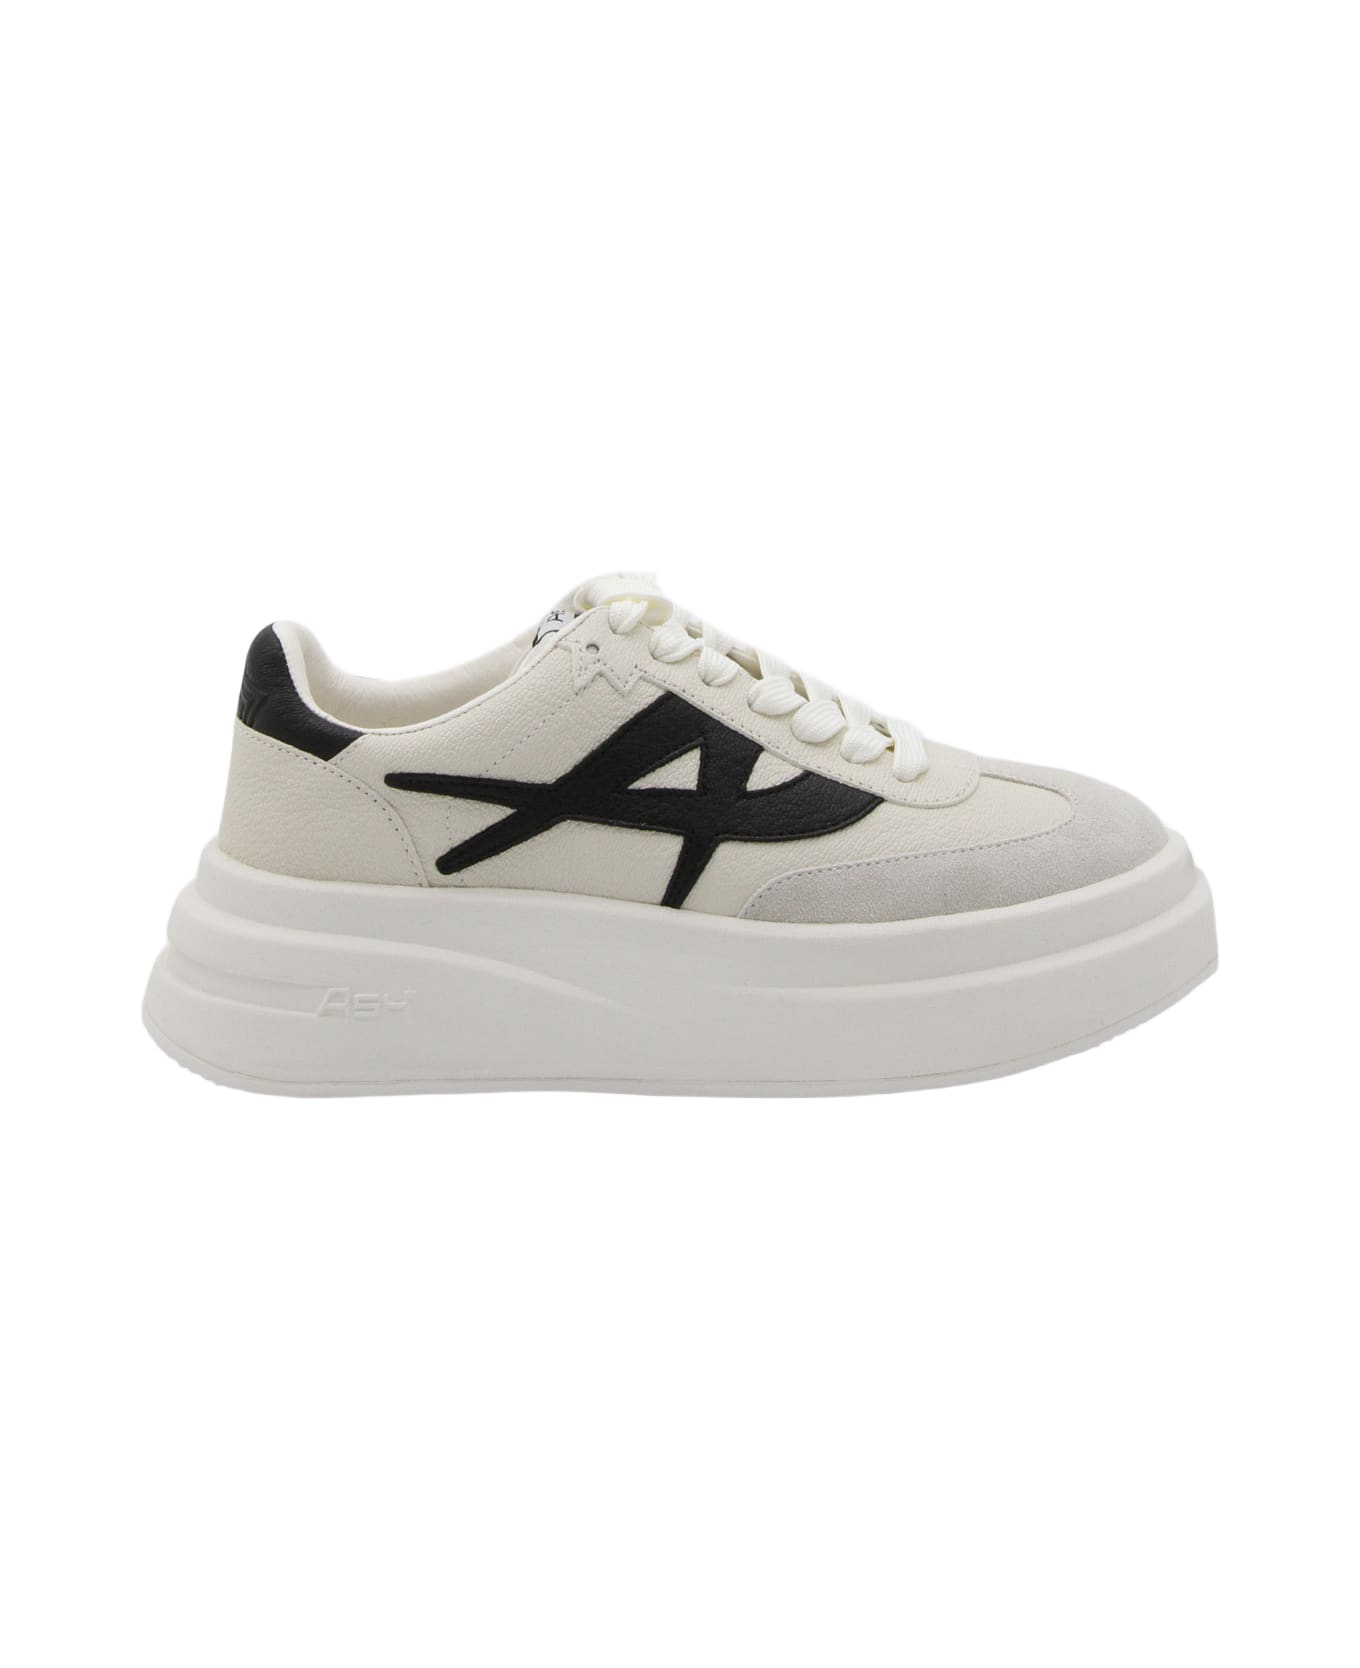 Ash White And Black Leather Sneakers - White ウェッジシューズ